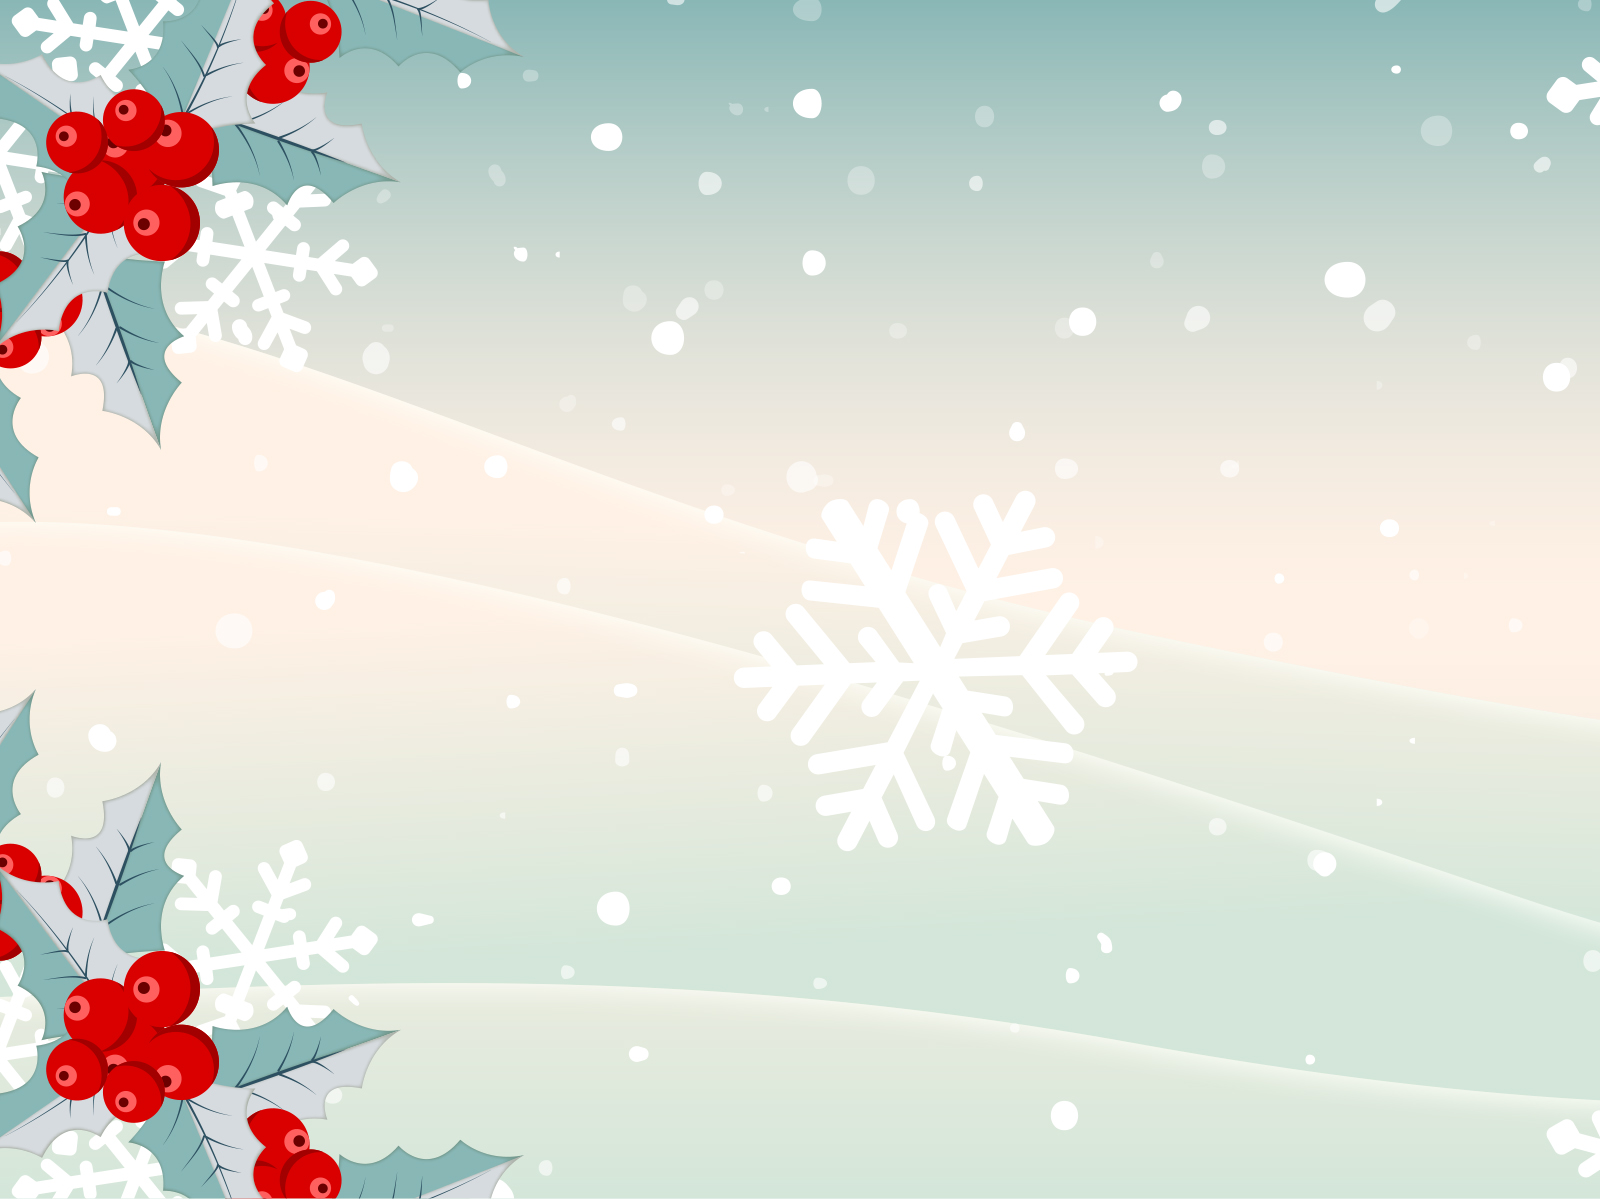 Xmas Snows Presentation Powerpoint Templates - Christmas, Green, Objects -  Free PPT Backgrounds and Templates